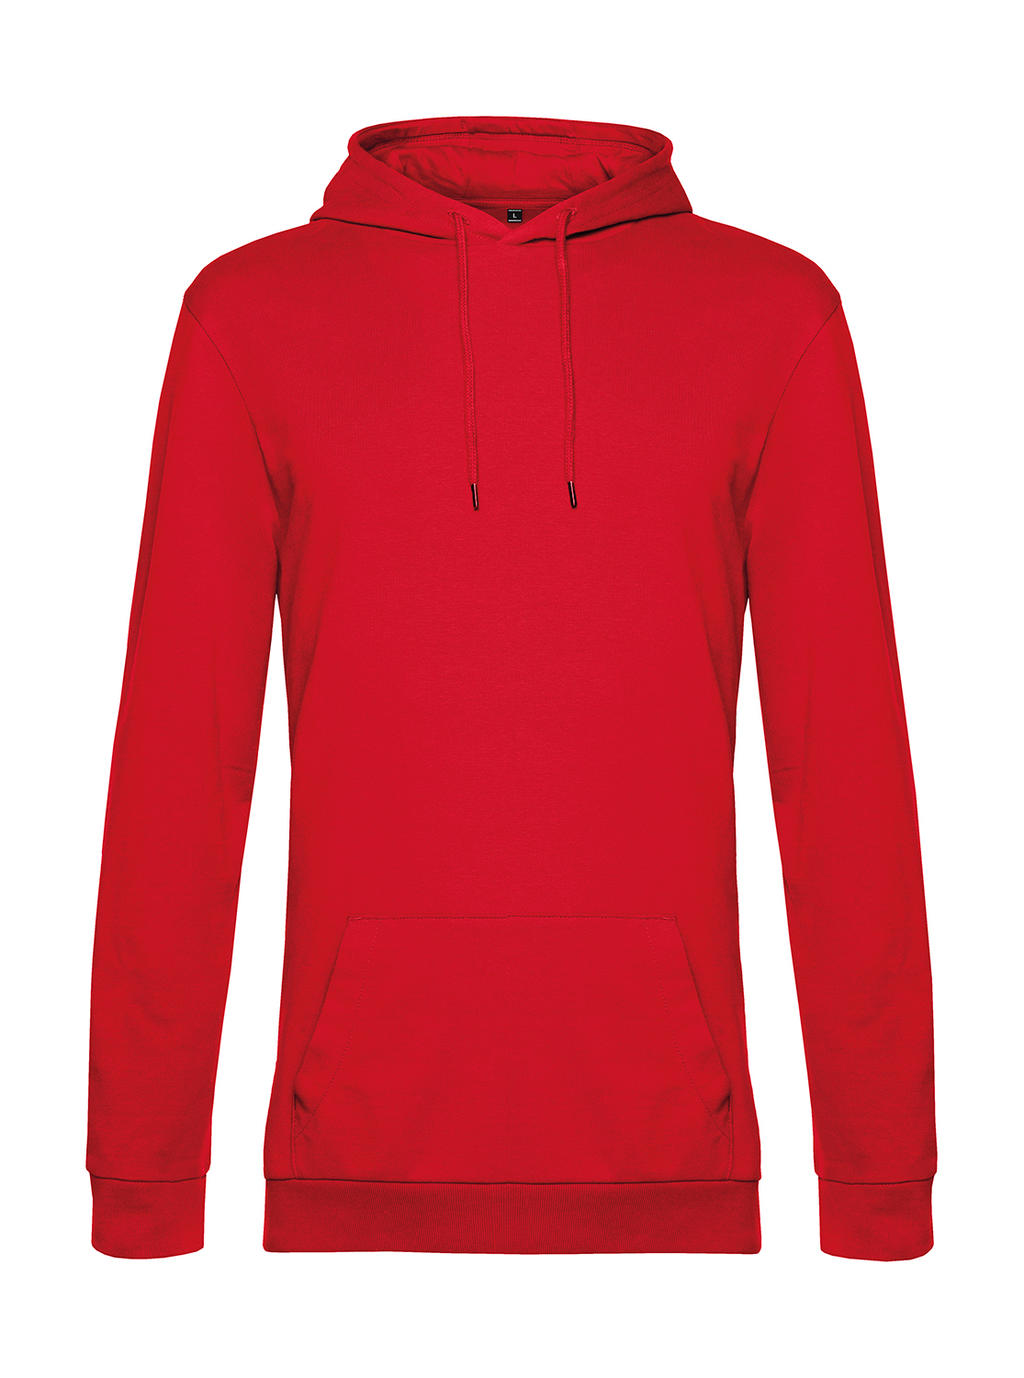 Mikina s kapucňou #Hoodie French Terry - red